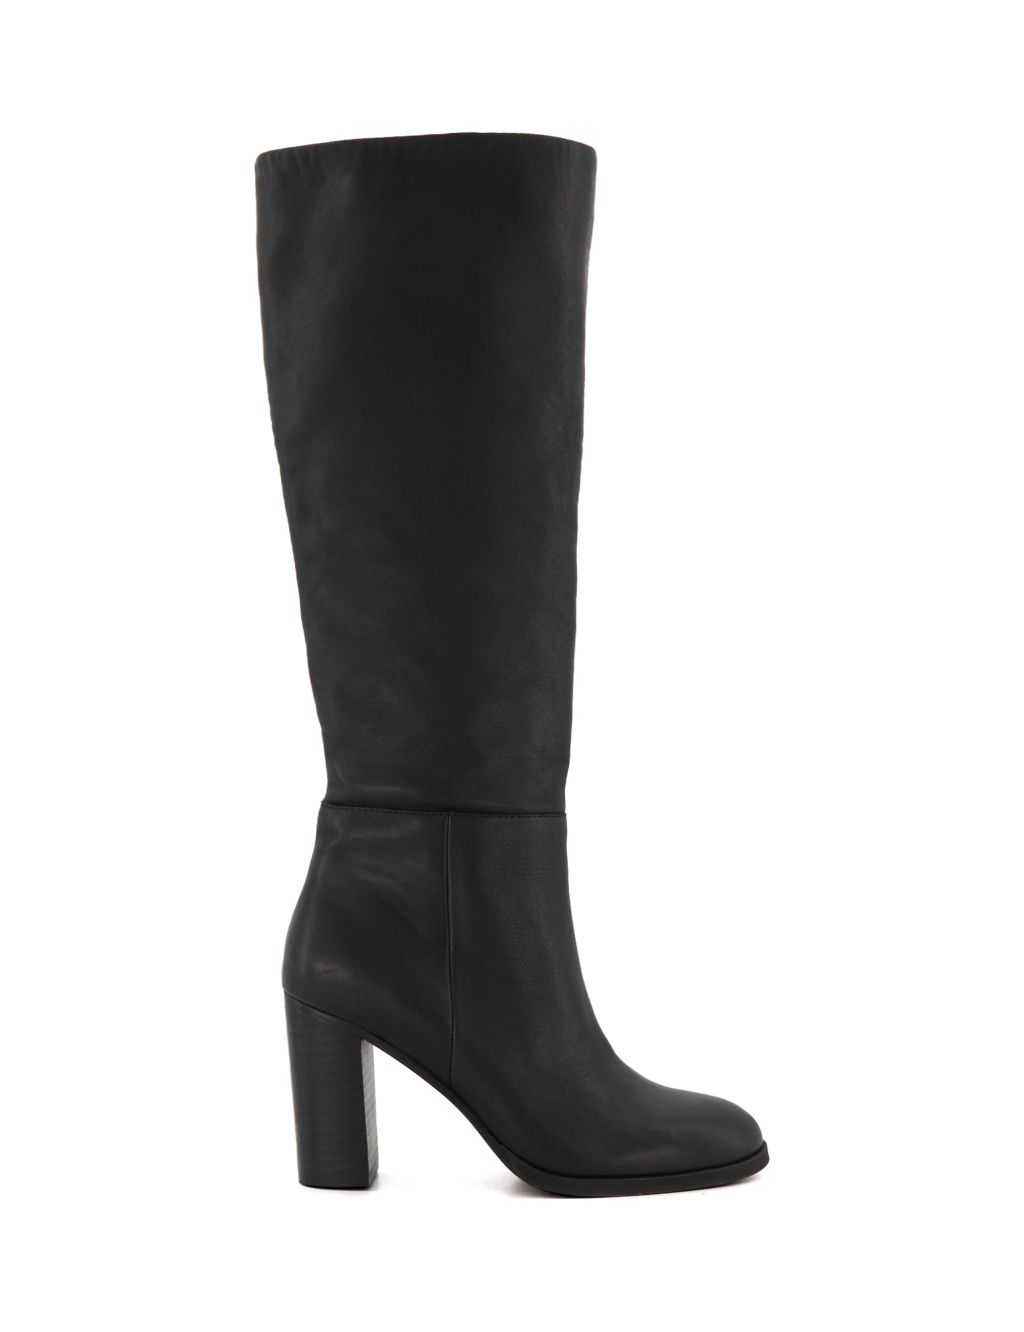 Scuba Tie Up Back Knee High Boots - 3 Colours - Just $11